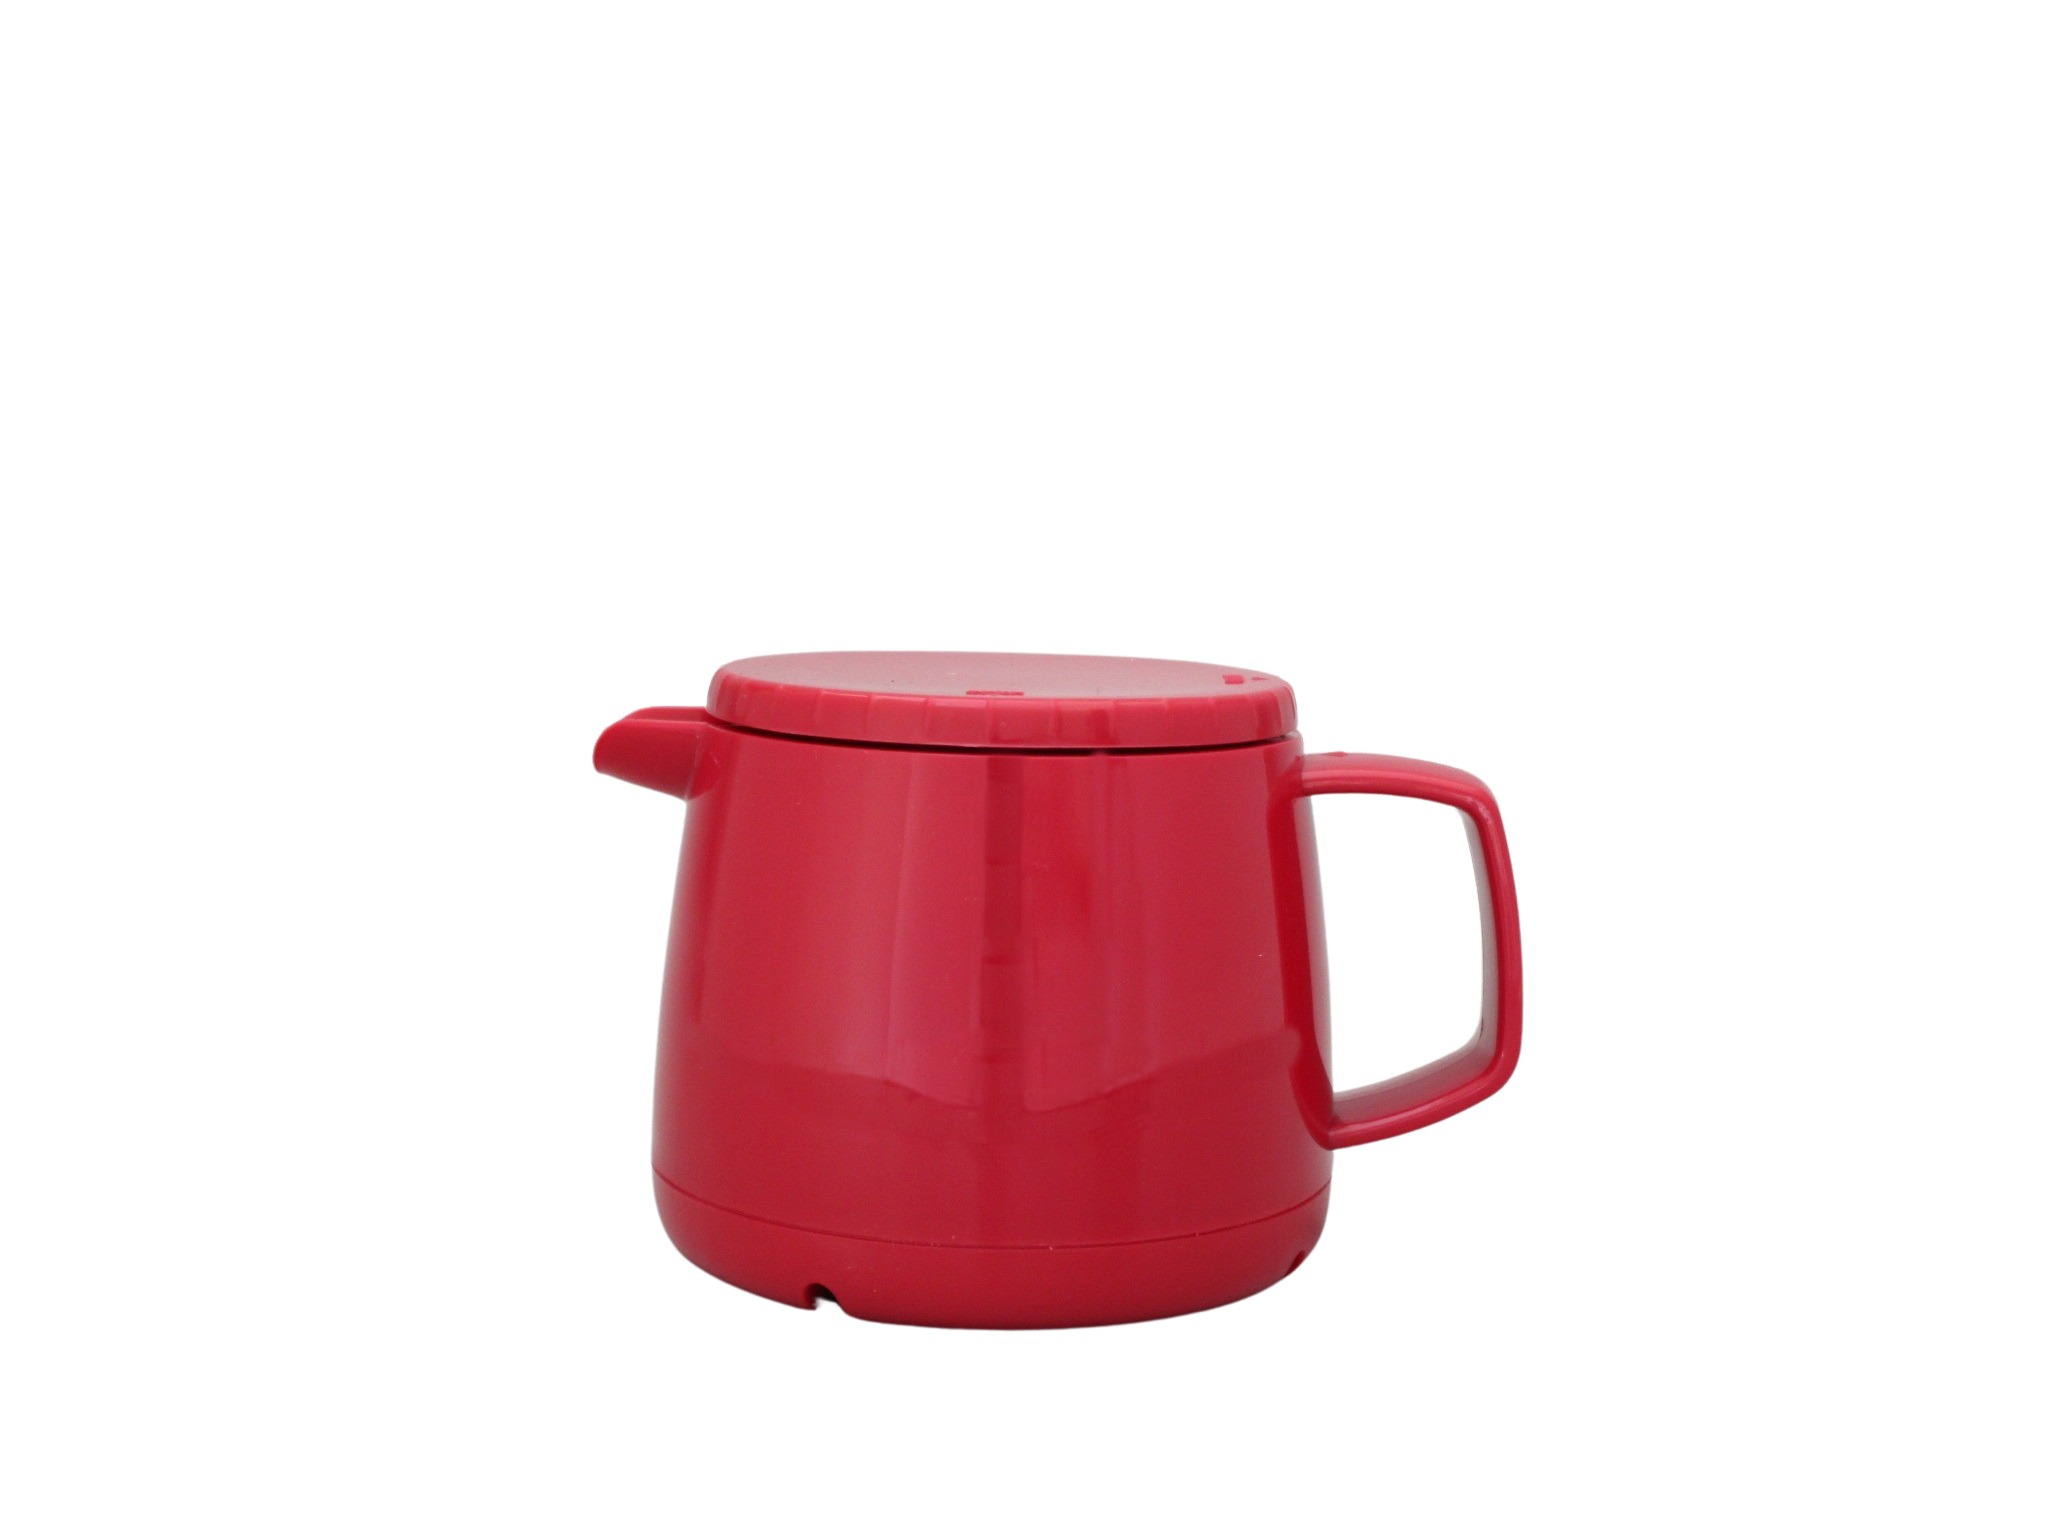 JAZZ030-046 - Insulated carafe low height stackable red 0.30 L - Isobel